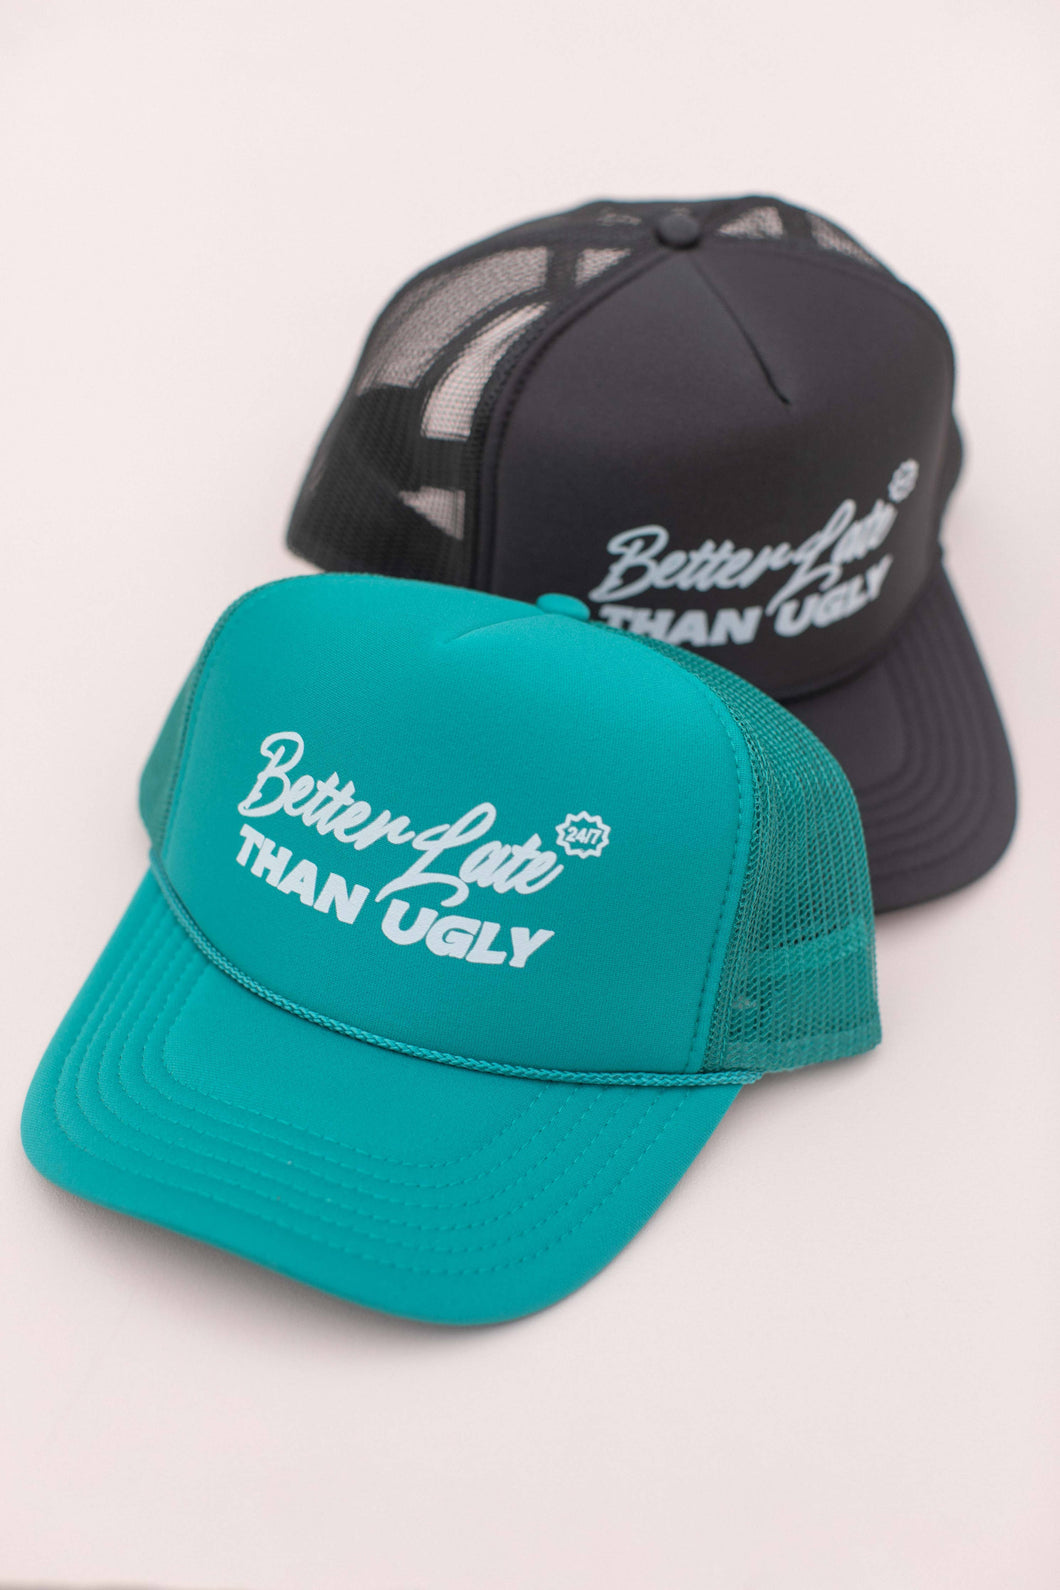 Better Late than Ugly Mesh Trucker Hat